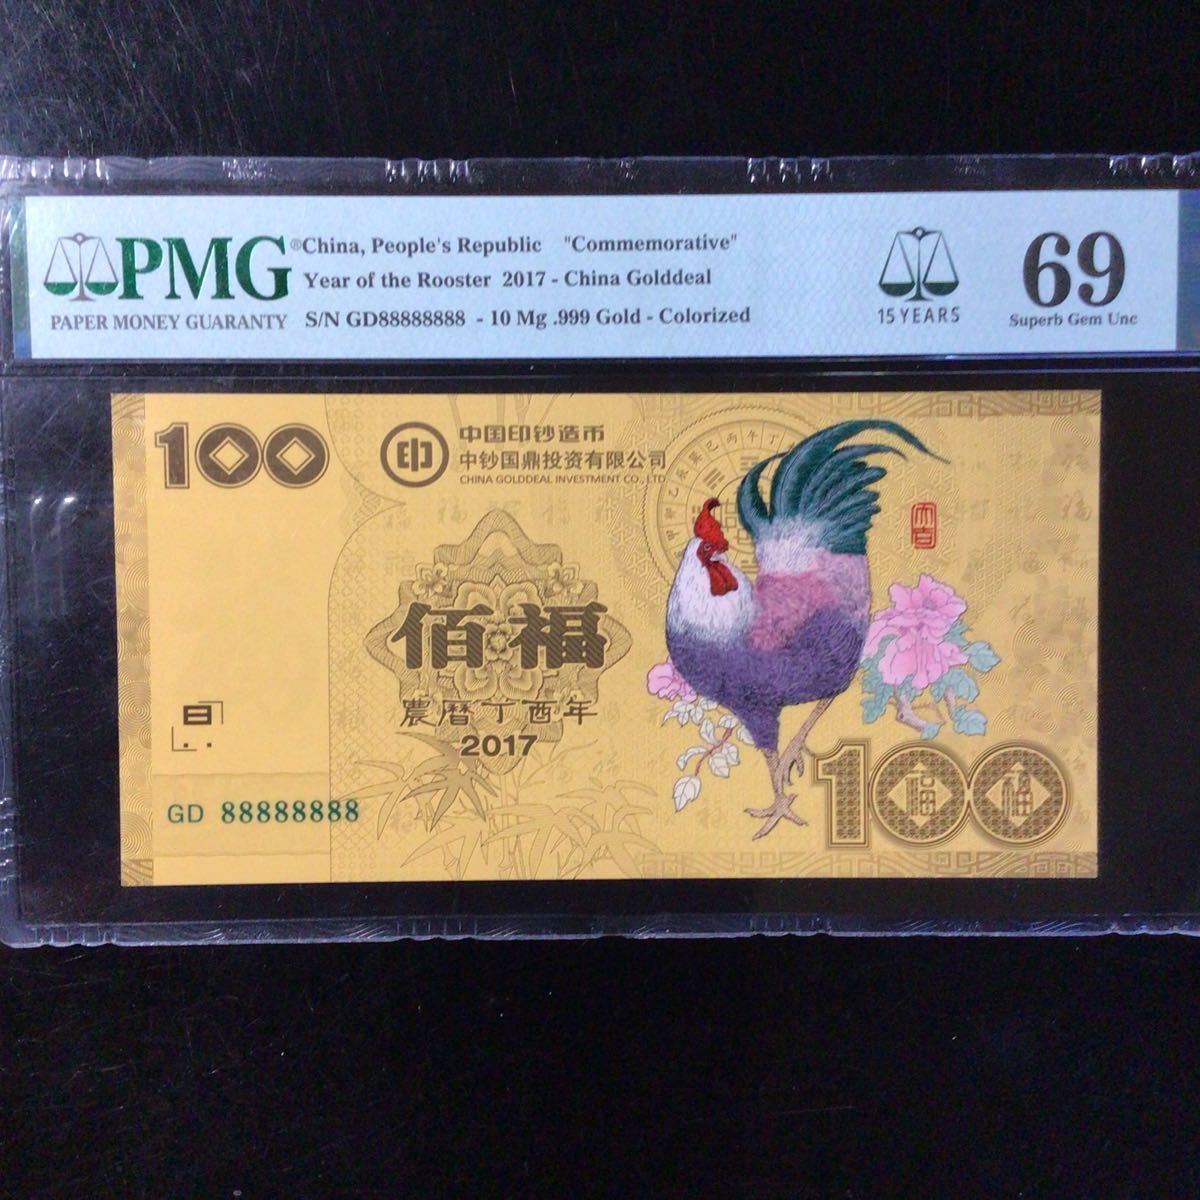 World Banknote Grading CHINA 《Commemorative Year of the Rooster》China  Golddeal【2017】『PMG Grading Superb Gem Uncirculated 69』